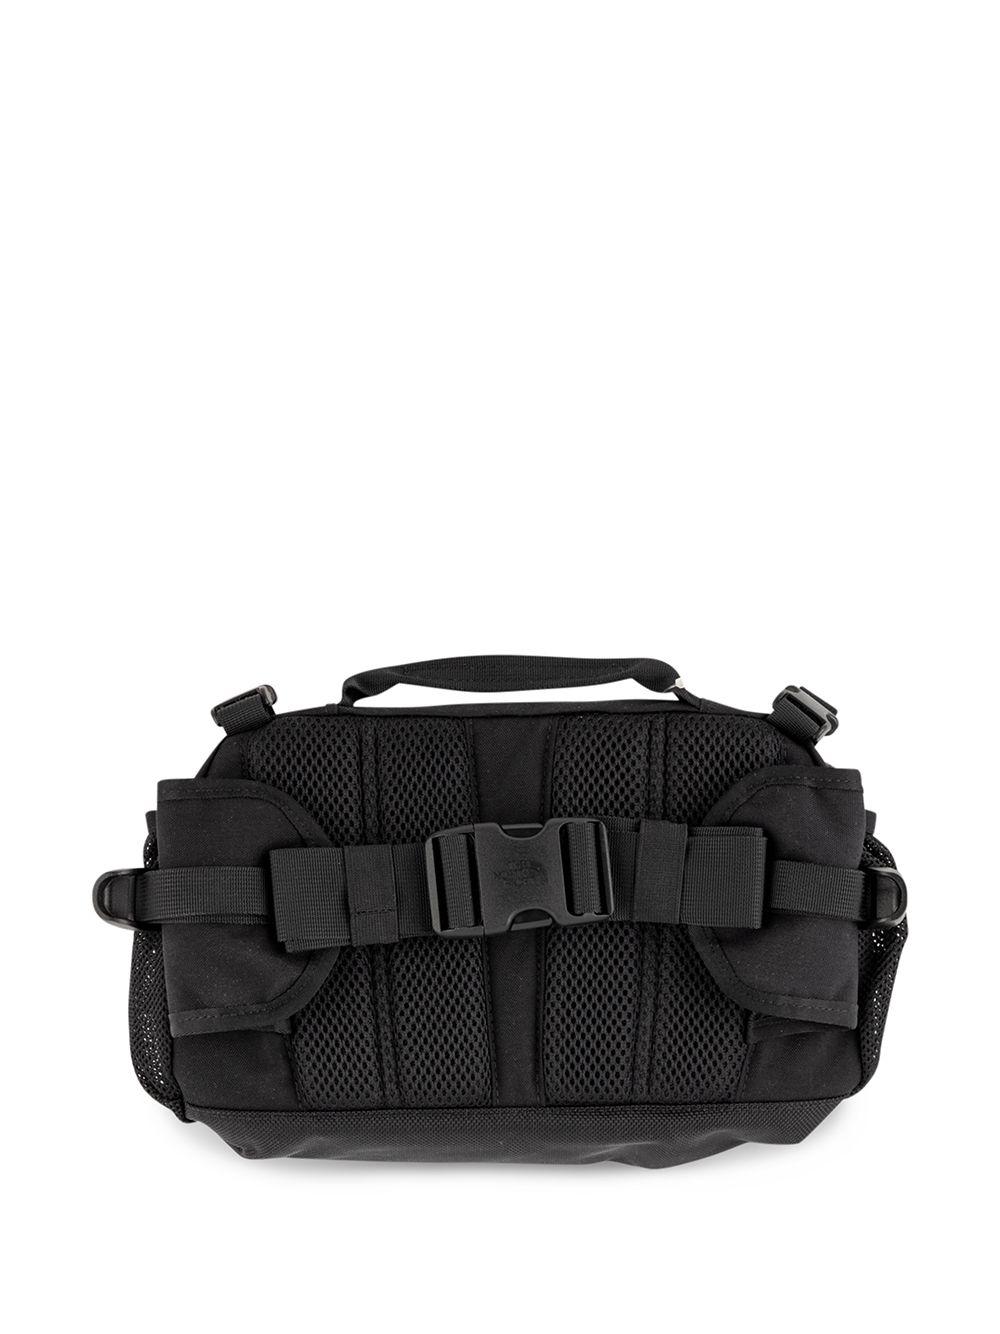 Supreme X The North Face Expedition Waist Bag in Black - Lyst